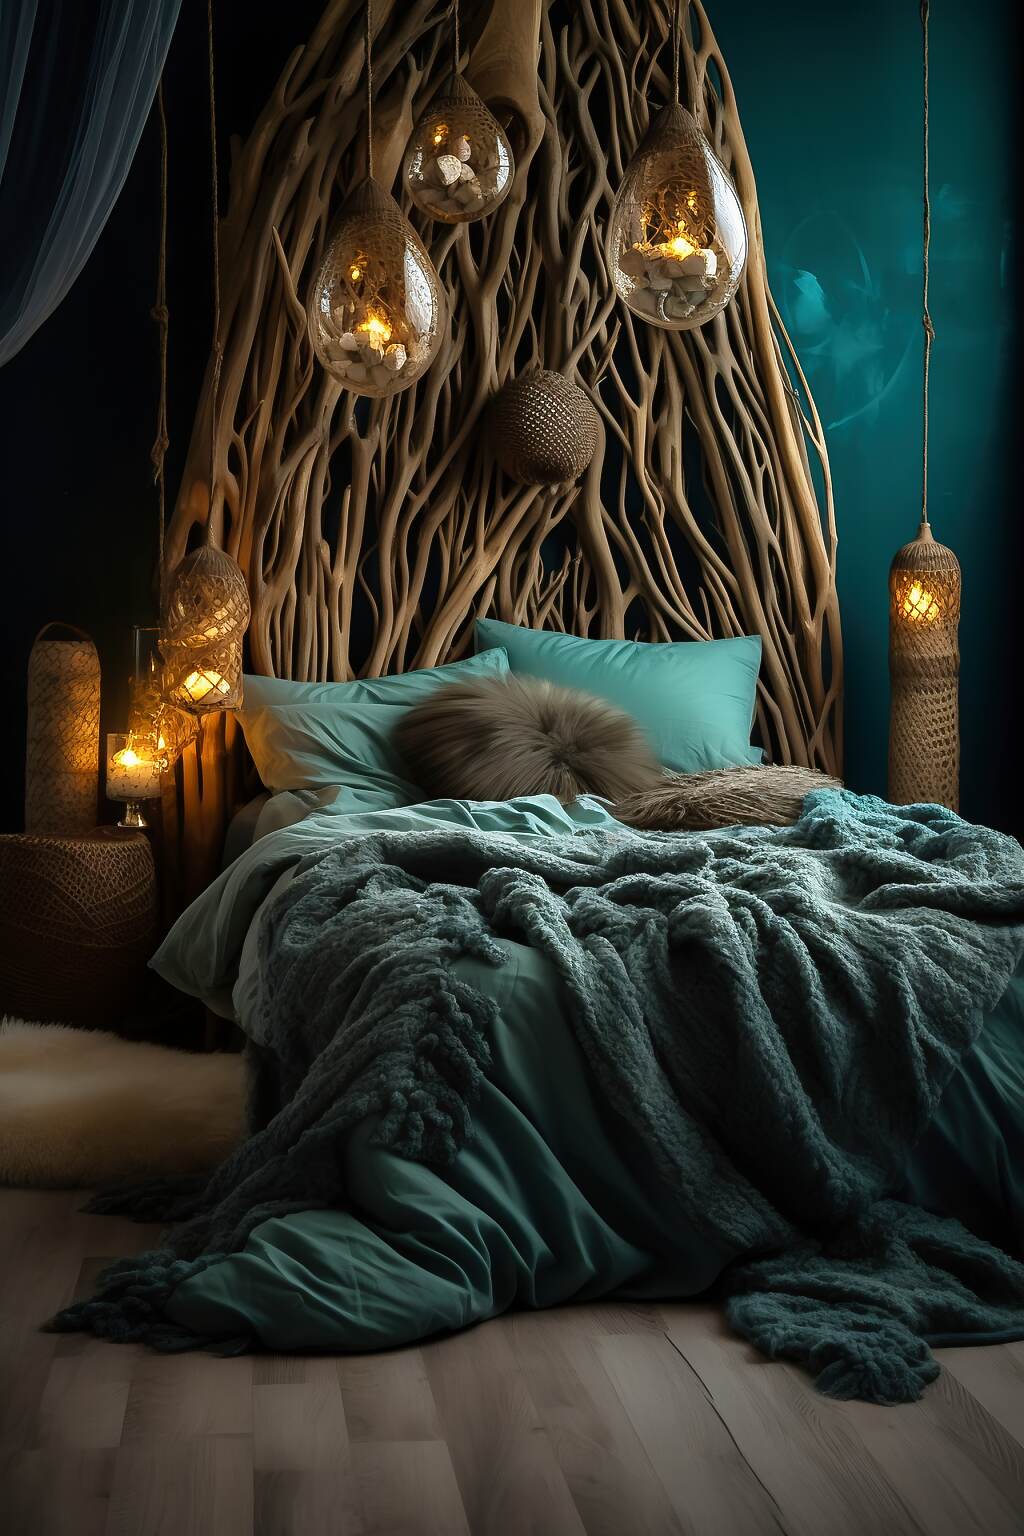 Small Dark Boho Bedroom With A Blue &Amp; Grey Color Scheme, Featuring Seashell Decor, Driftwood Furniture, And Ocean Art, Creating A Peaceful And Calming Atmosphere.